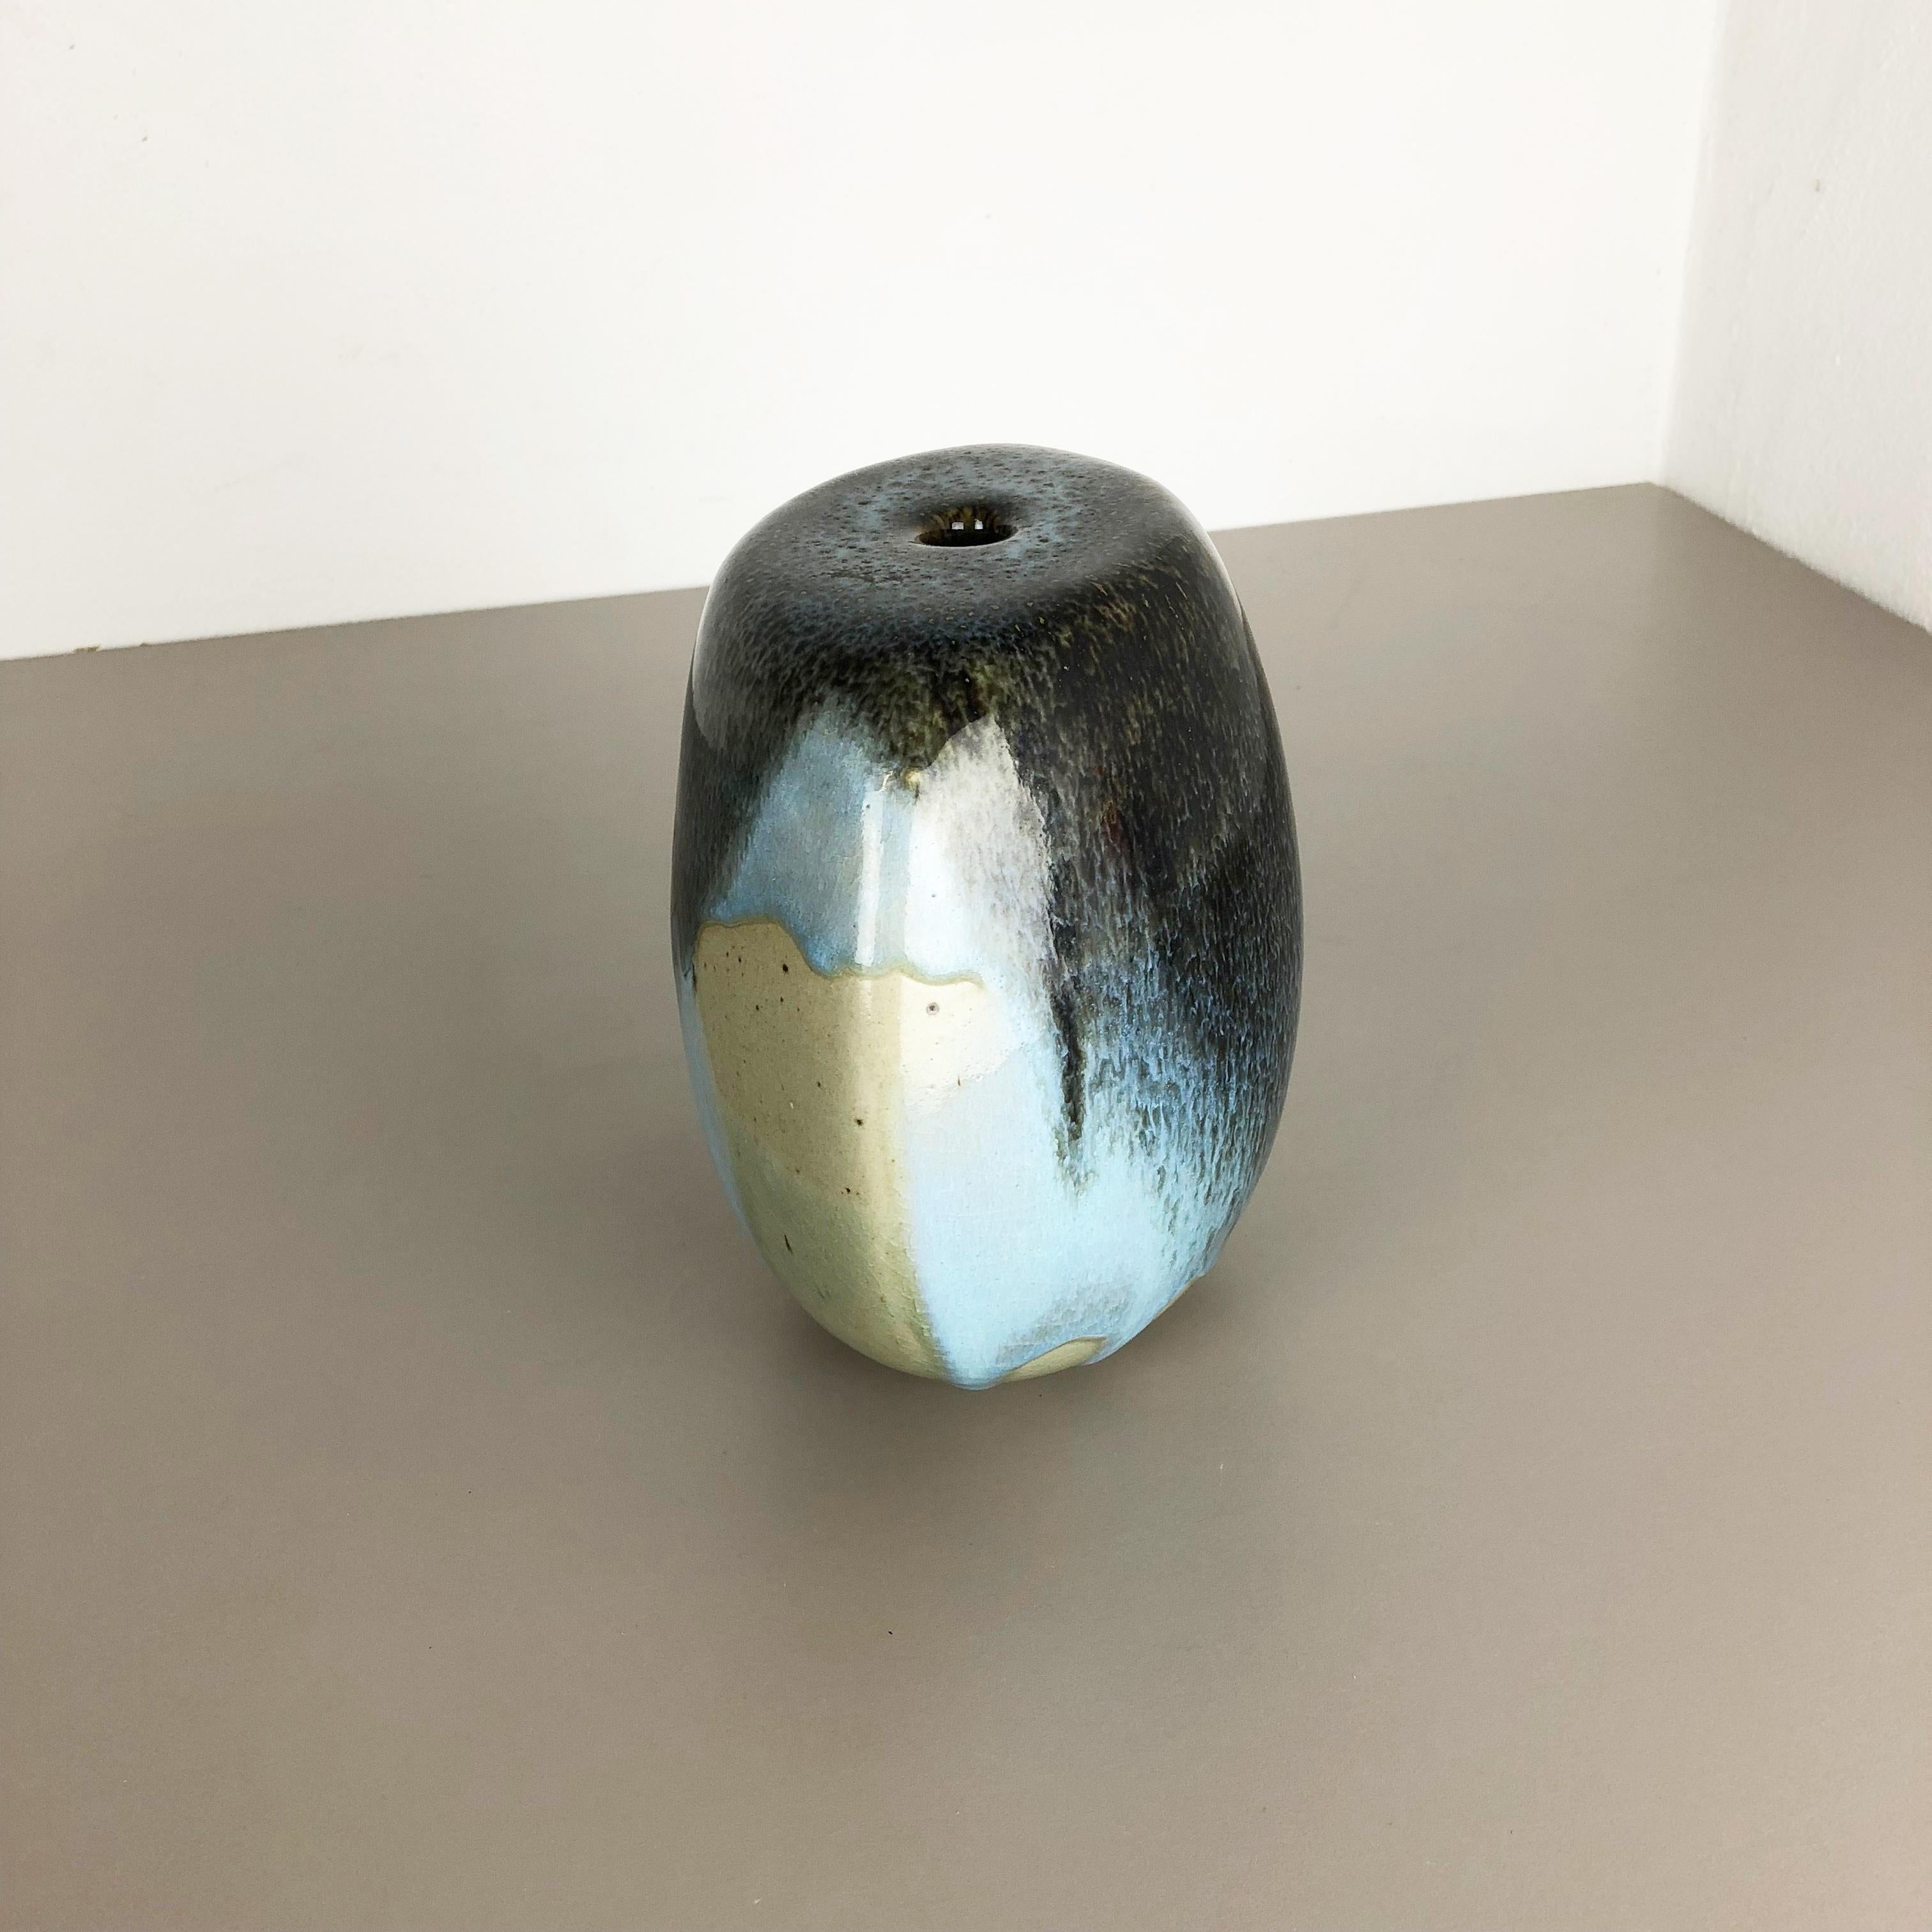 Abstract Ceramic Studio Stoneware Vase by Gotlind Weigel, Germany, 1960s In Good Condition For Sale In Kirchlengern, DE